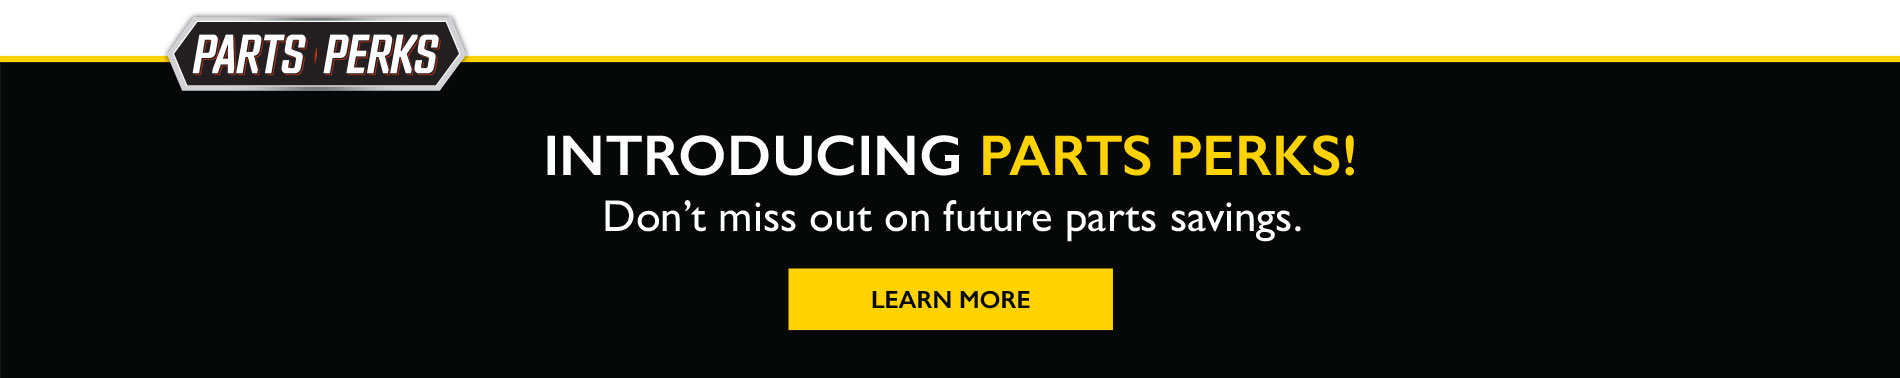 Introducing Parts Perks! Don't miss out on future parts savings.